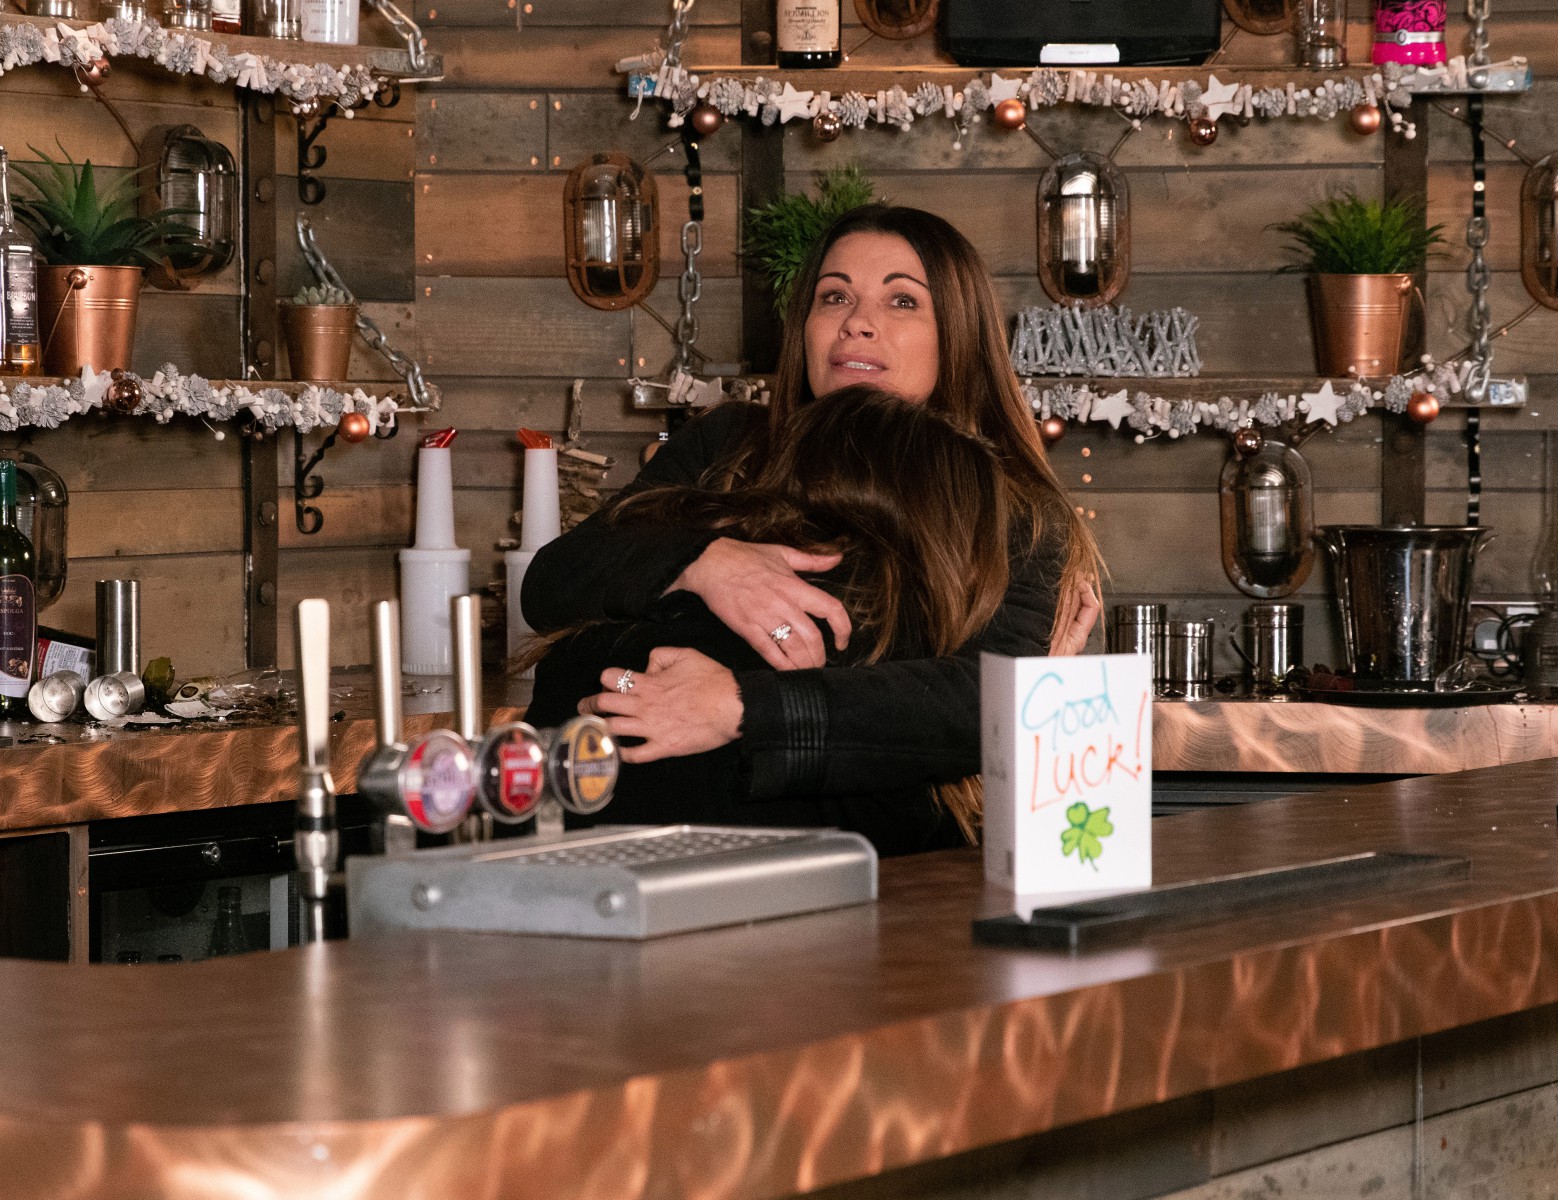 Carla comforts Michelle after finding her smashing the Bistro to smlithereens